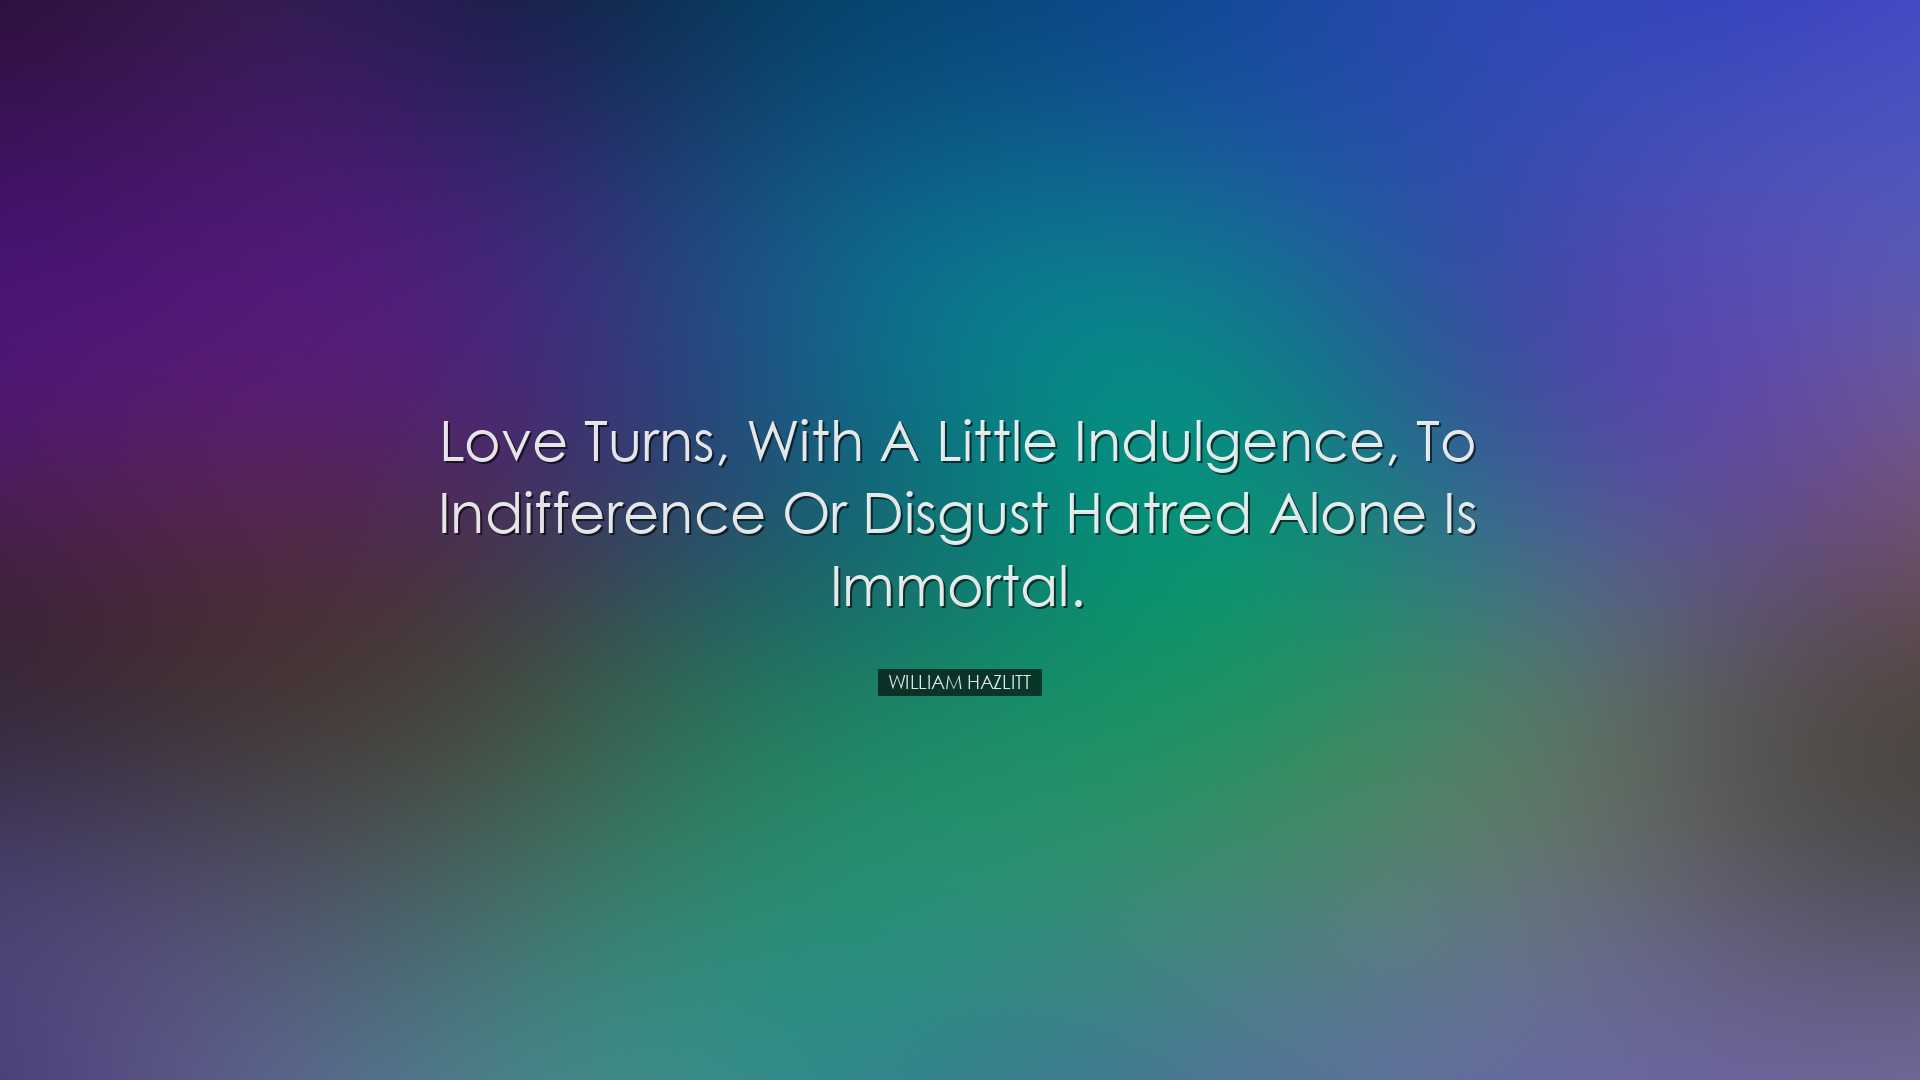 Love turns, with a little indulgence, to indifference or disgust h